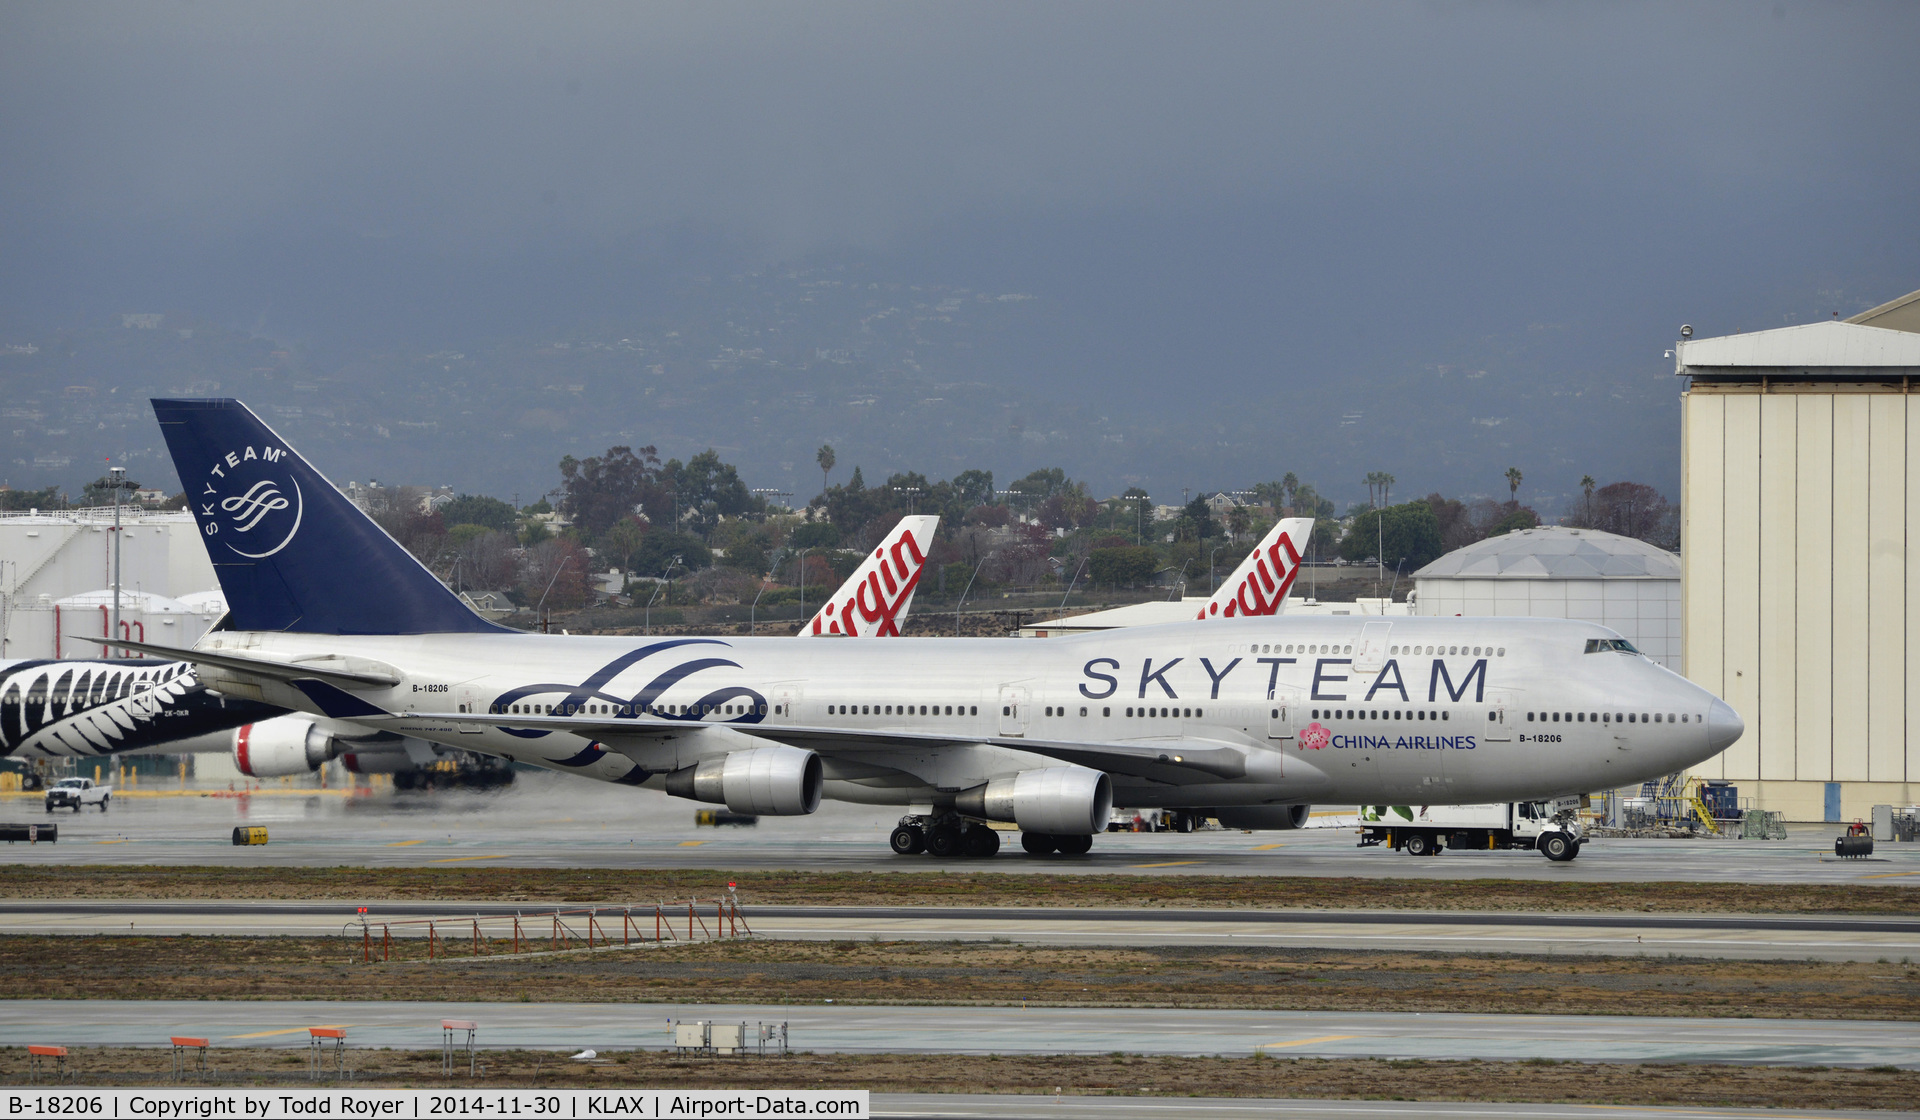 B-18206, 1998 Boeing 747-409 C/N 29030, Taxiing to gate at LAX